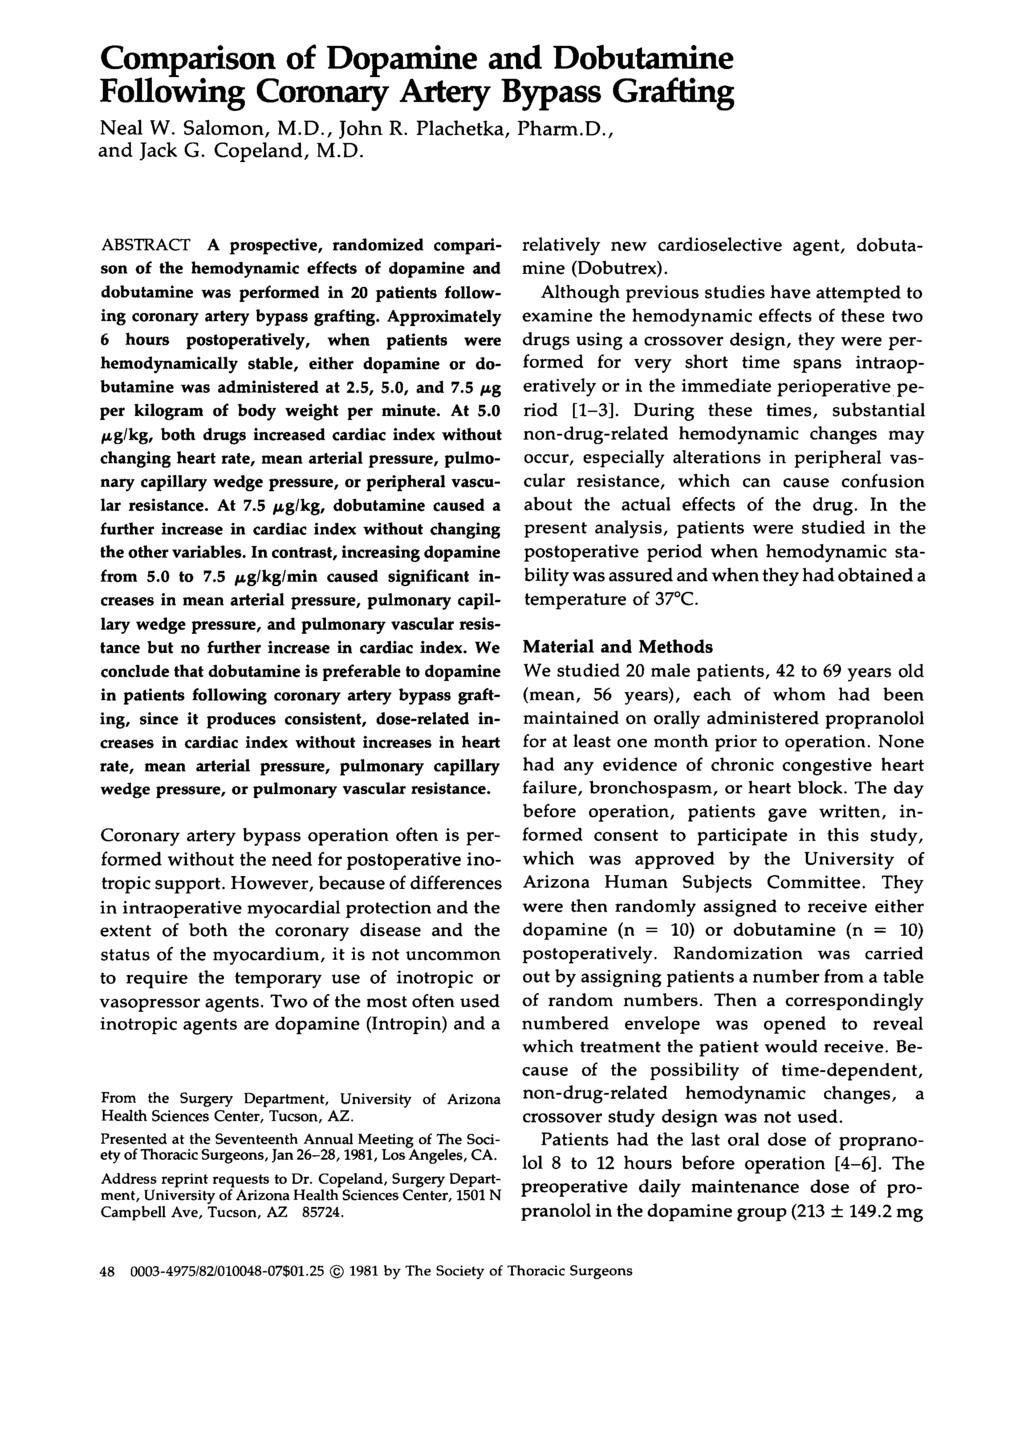 Comparison of Dopamine and Dobutamine Follaking CoronG Artery Bypass Grafting Neal W. Salomon, M.D., John R. Plachetka, Pharm.D., and Jack G. Copeland, M.D. ABSTRACT A prospective, randomized comparison of the hemodynamic effects of dopamine and dobutamine was performed in 20 patients following coronary artery bypass grafting.